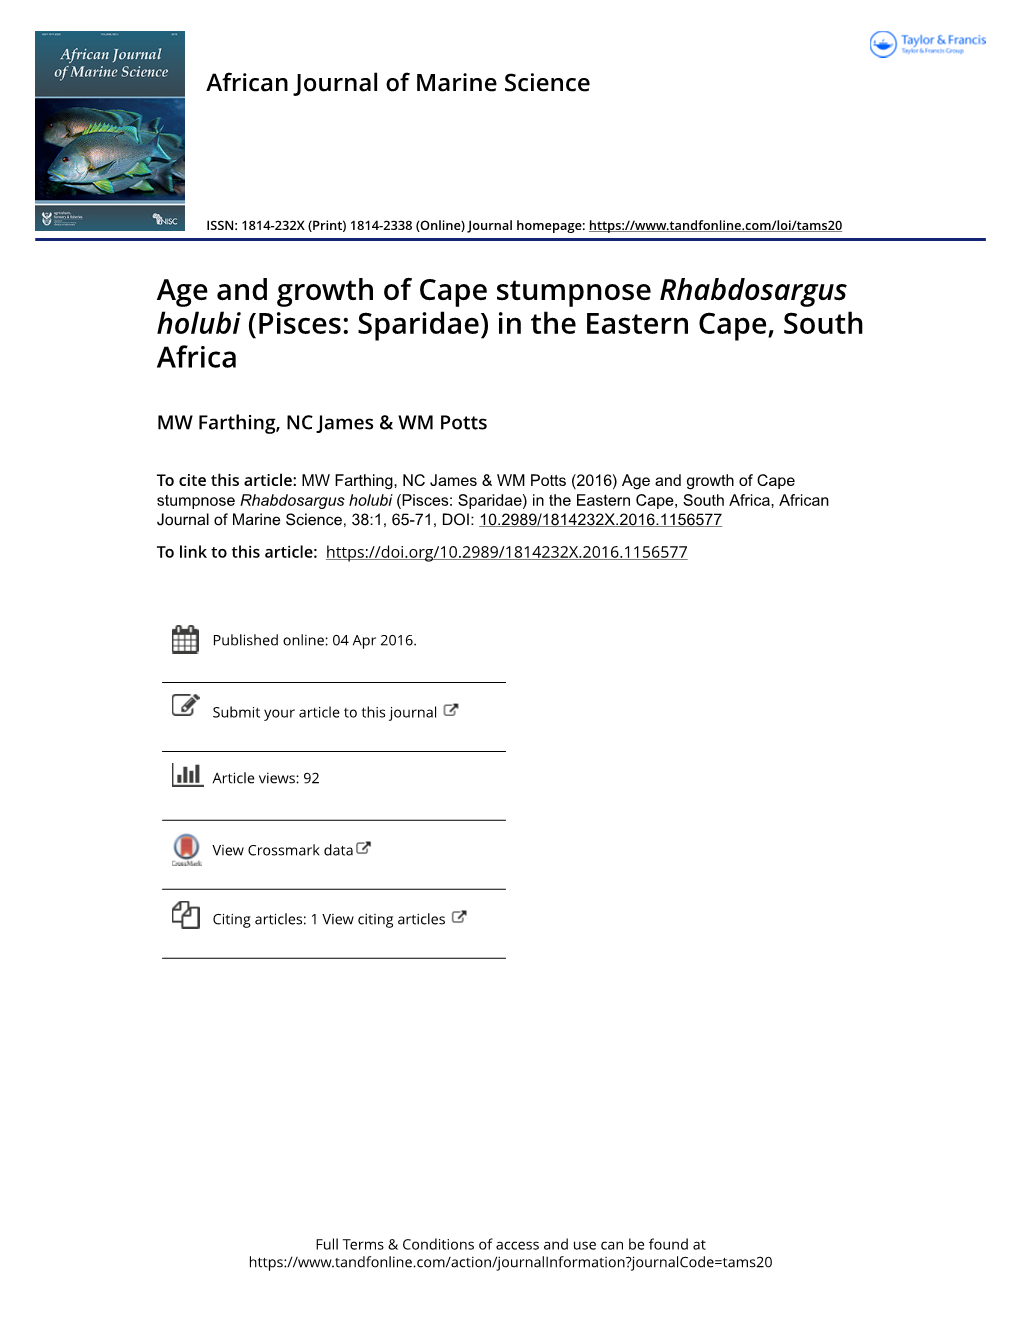 Age and Growth of Cape Stumpnose Rhabdosargus Holubi (Pisces: Sparidae) in the Eastern Cape, South Africa